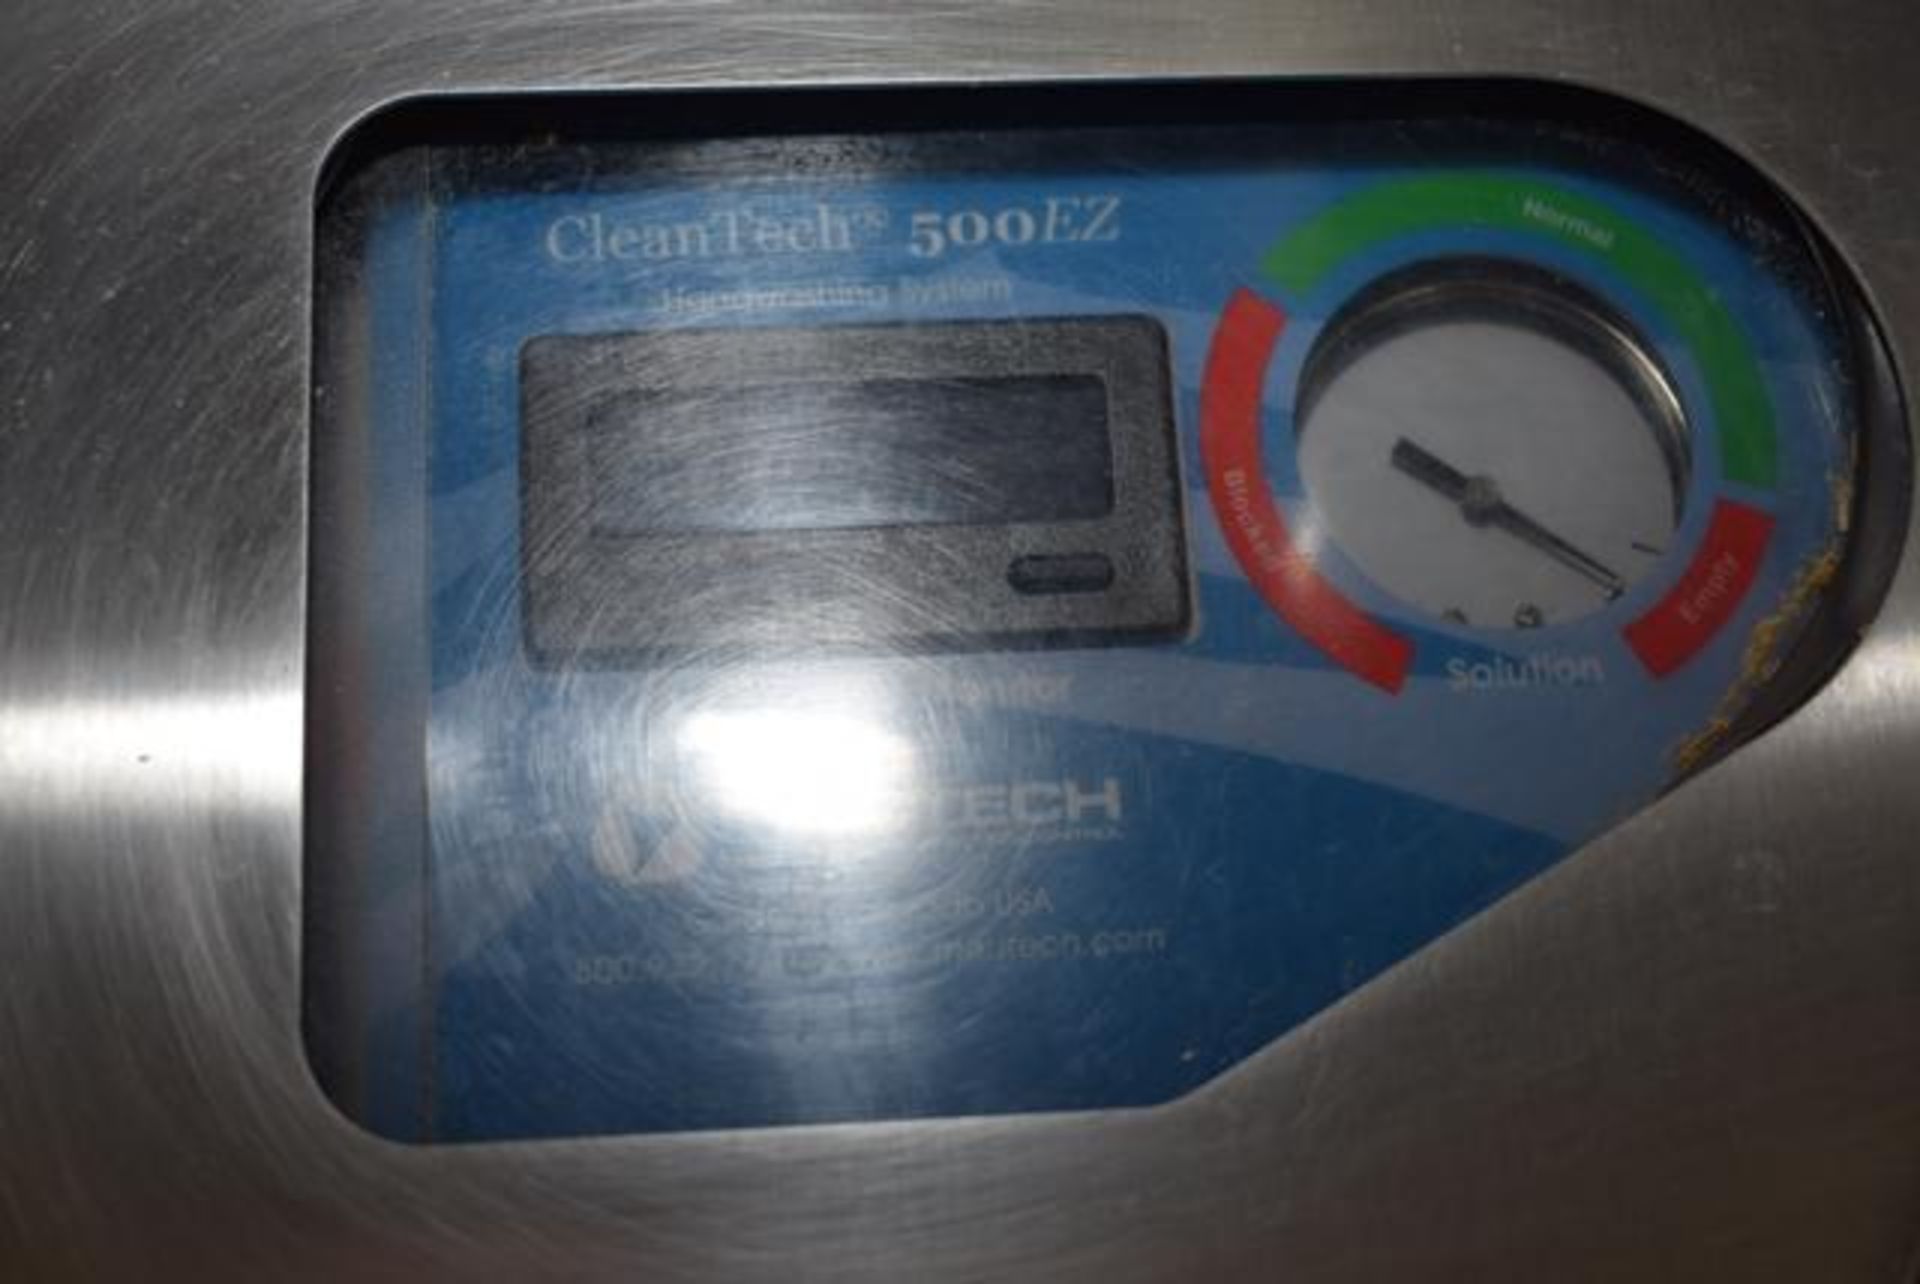 CleanTech Model 500EZ, S/n 1104ez, Automated Hand and Glove Cleansing System, Loading Fee: $100 - Image 2 of 3